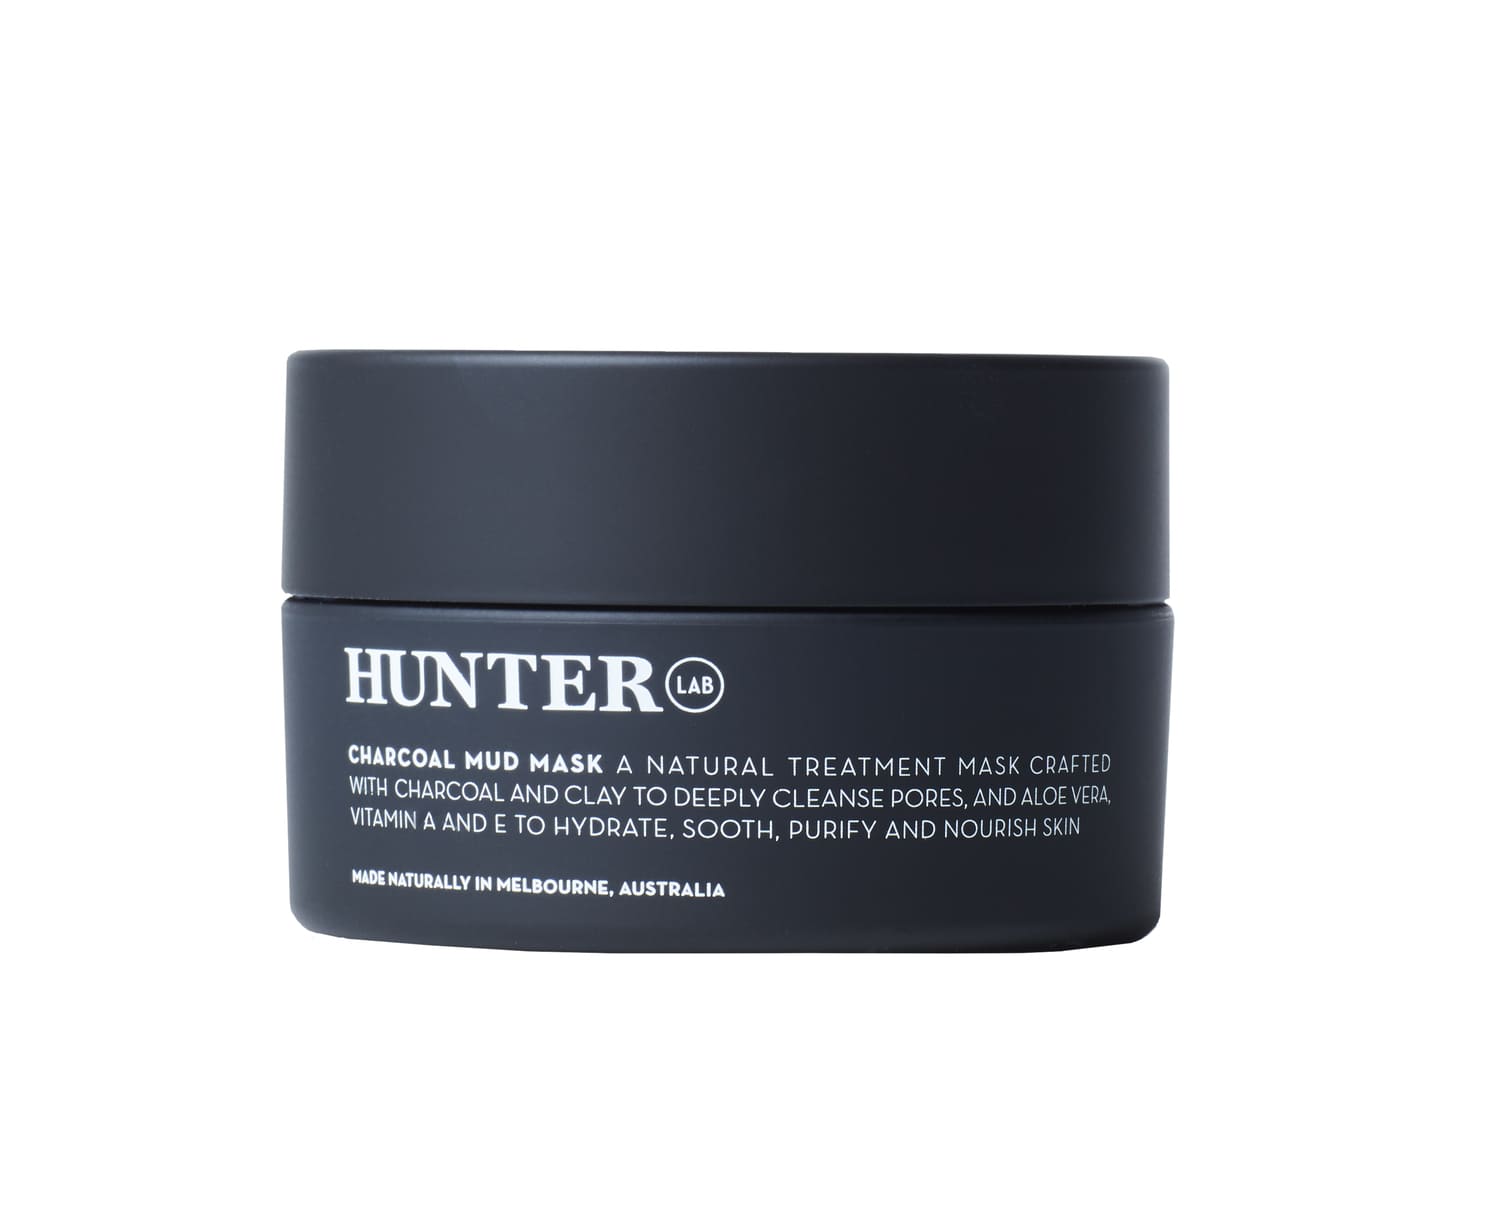 Hunter Lab Charcoal Mud Mask primary packaging